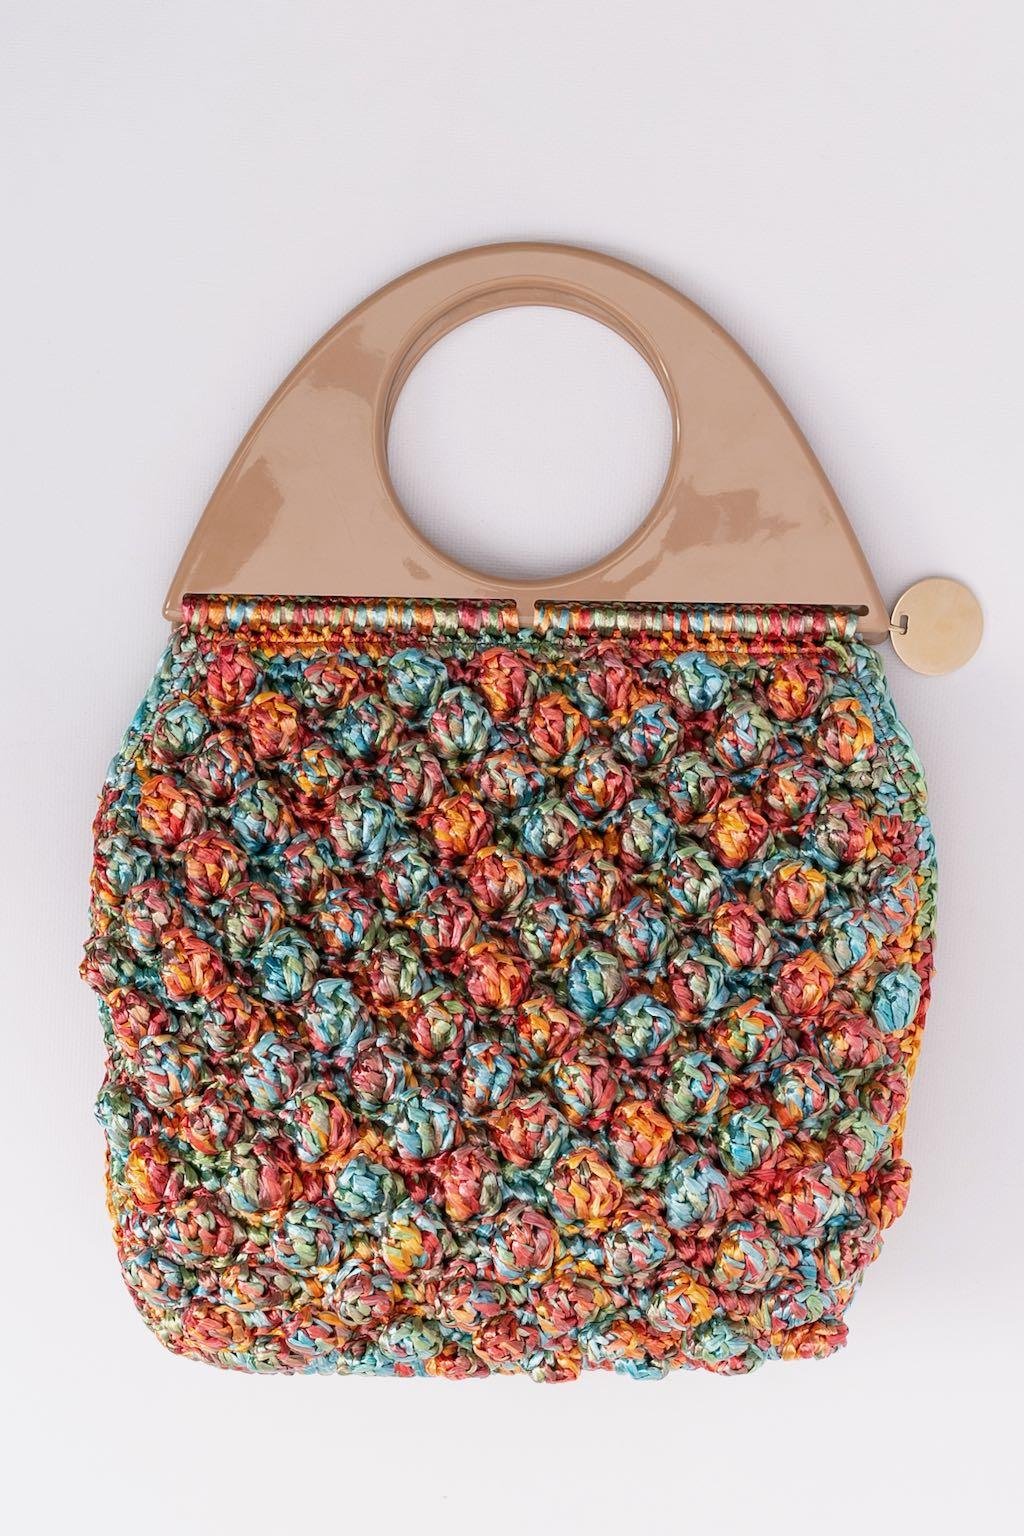 Missoni - Multi-color raffia bag, with bakelite handles and a magnetic lock. 

Additional information: 
Dimensions: Length: 34 cm (13.38